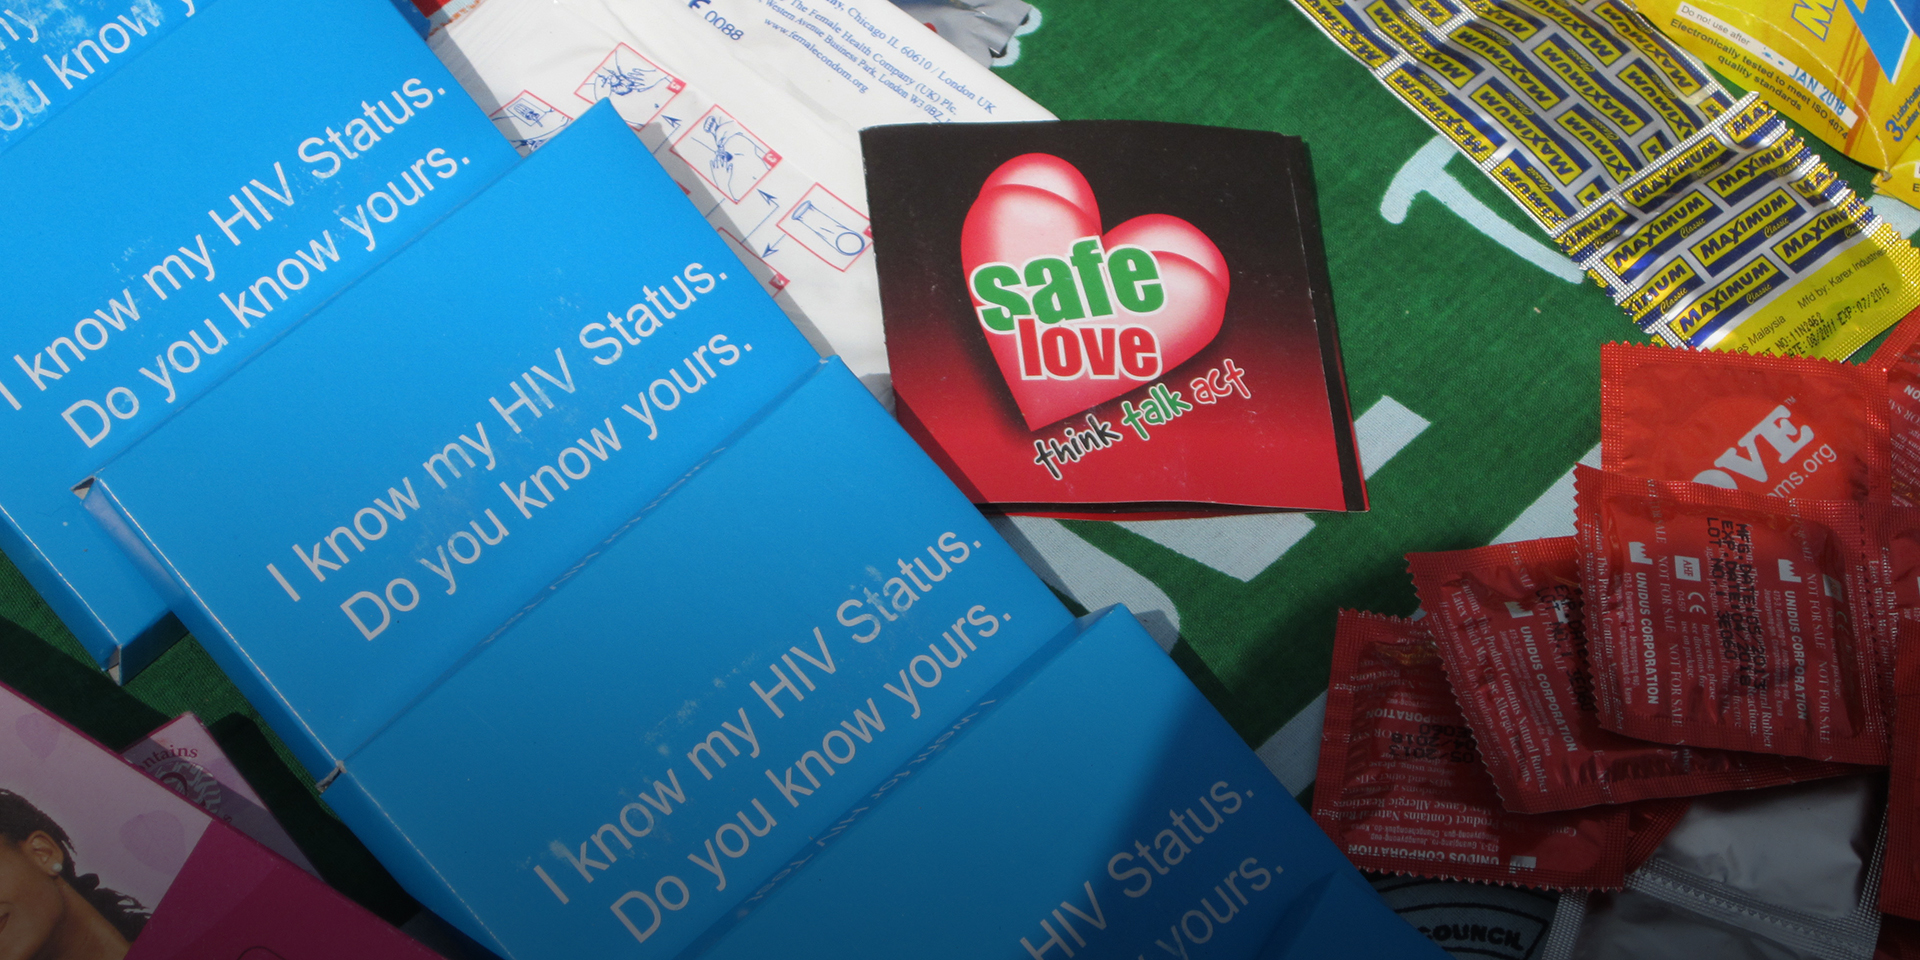 Image of safe sex promotional materials with text written on them such as 